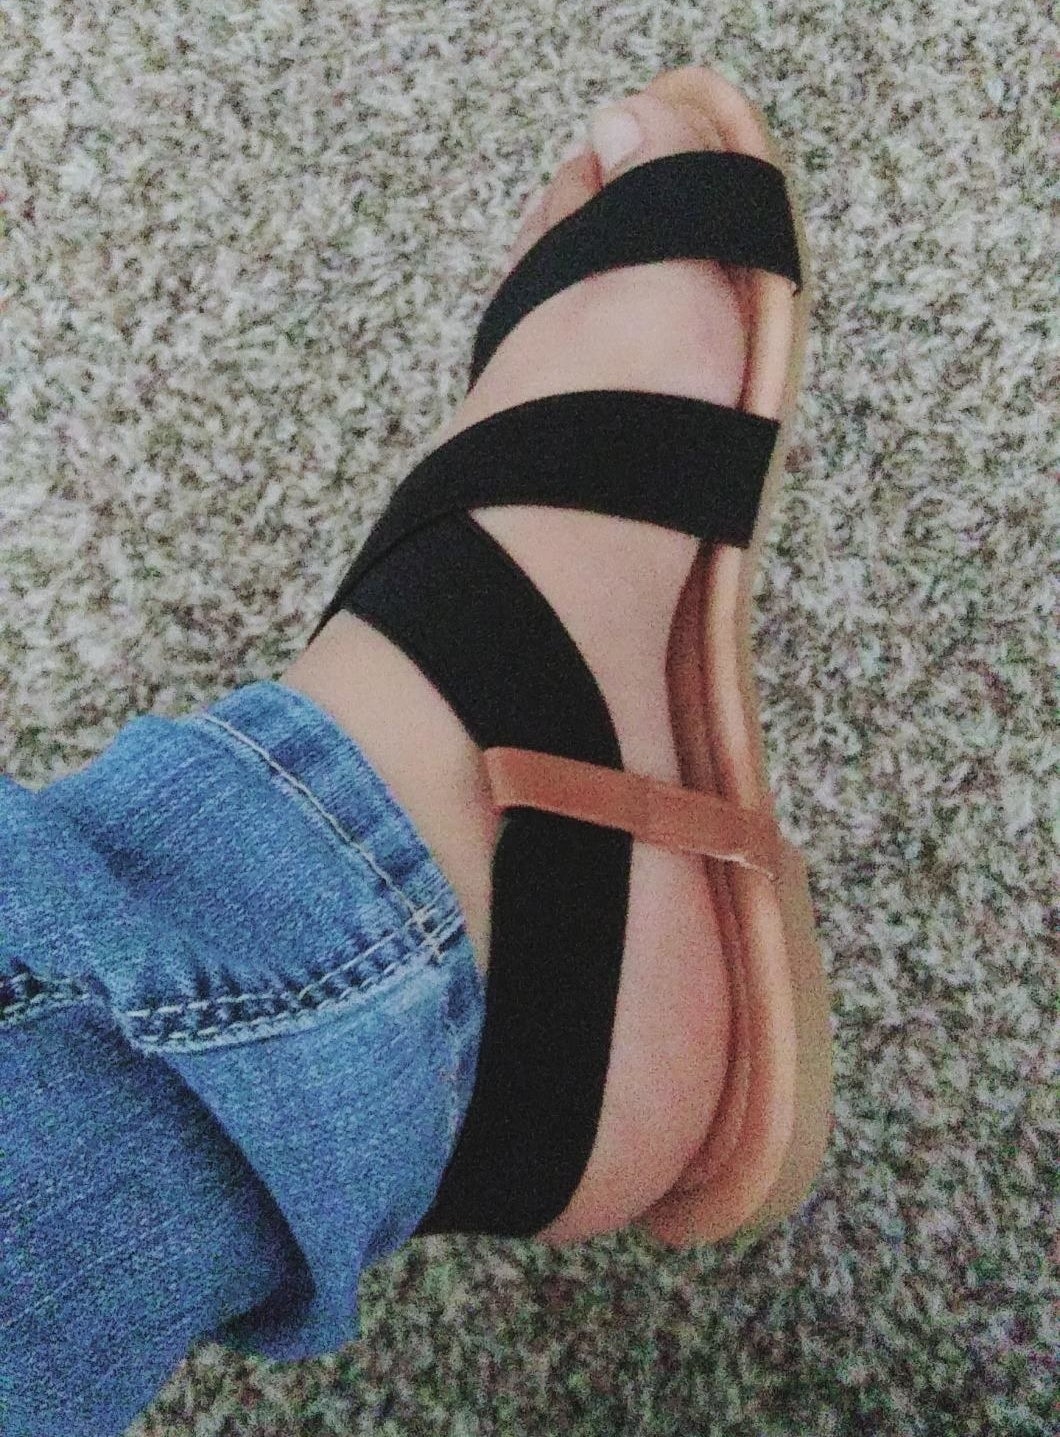 Reviewer in the black sandals